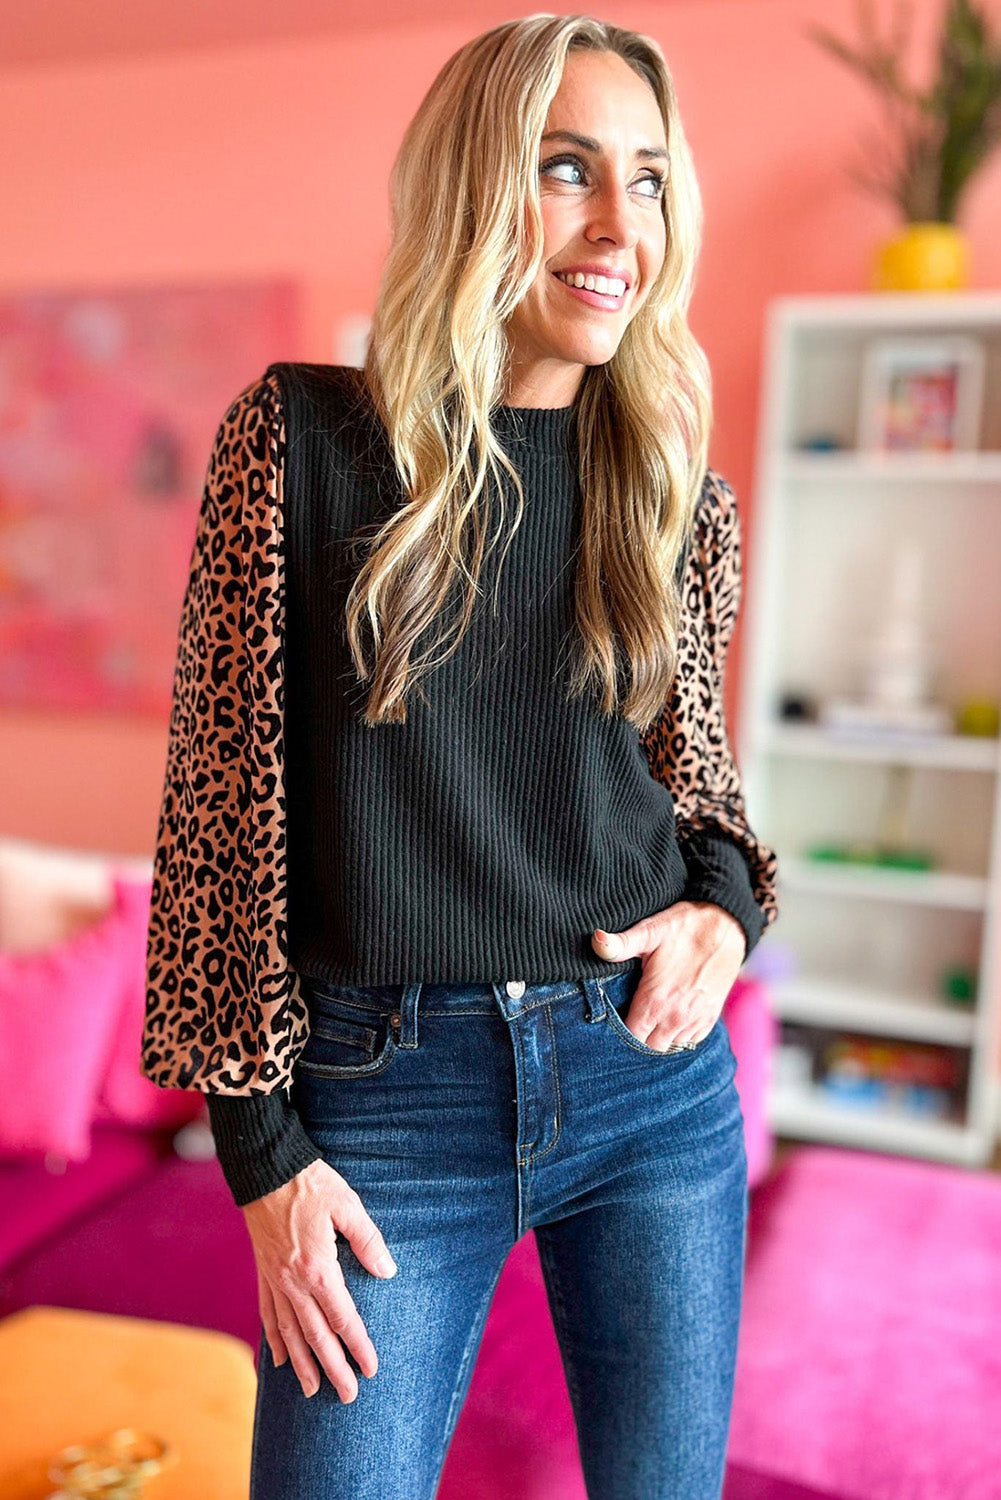 Apricot Leopard Print Long Sleeve Ribbed Knit Blouse